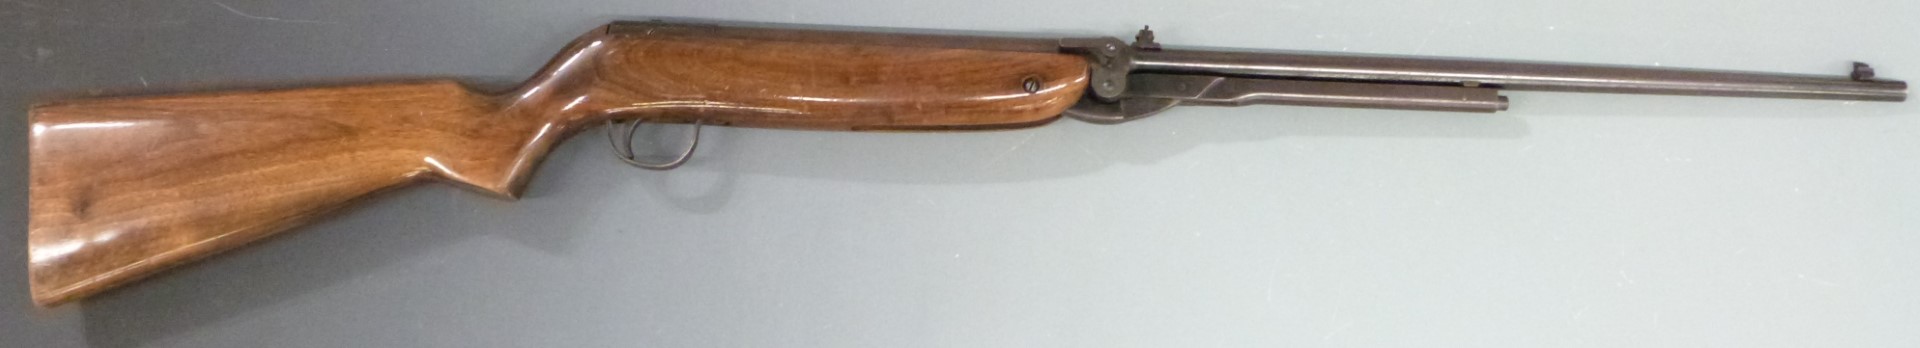 Webley Mark 3 .22 air rifle with semi-pistol grip, named plaque inset to the stock and adjustable